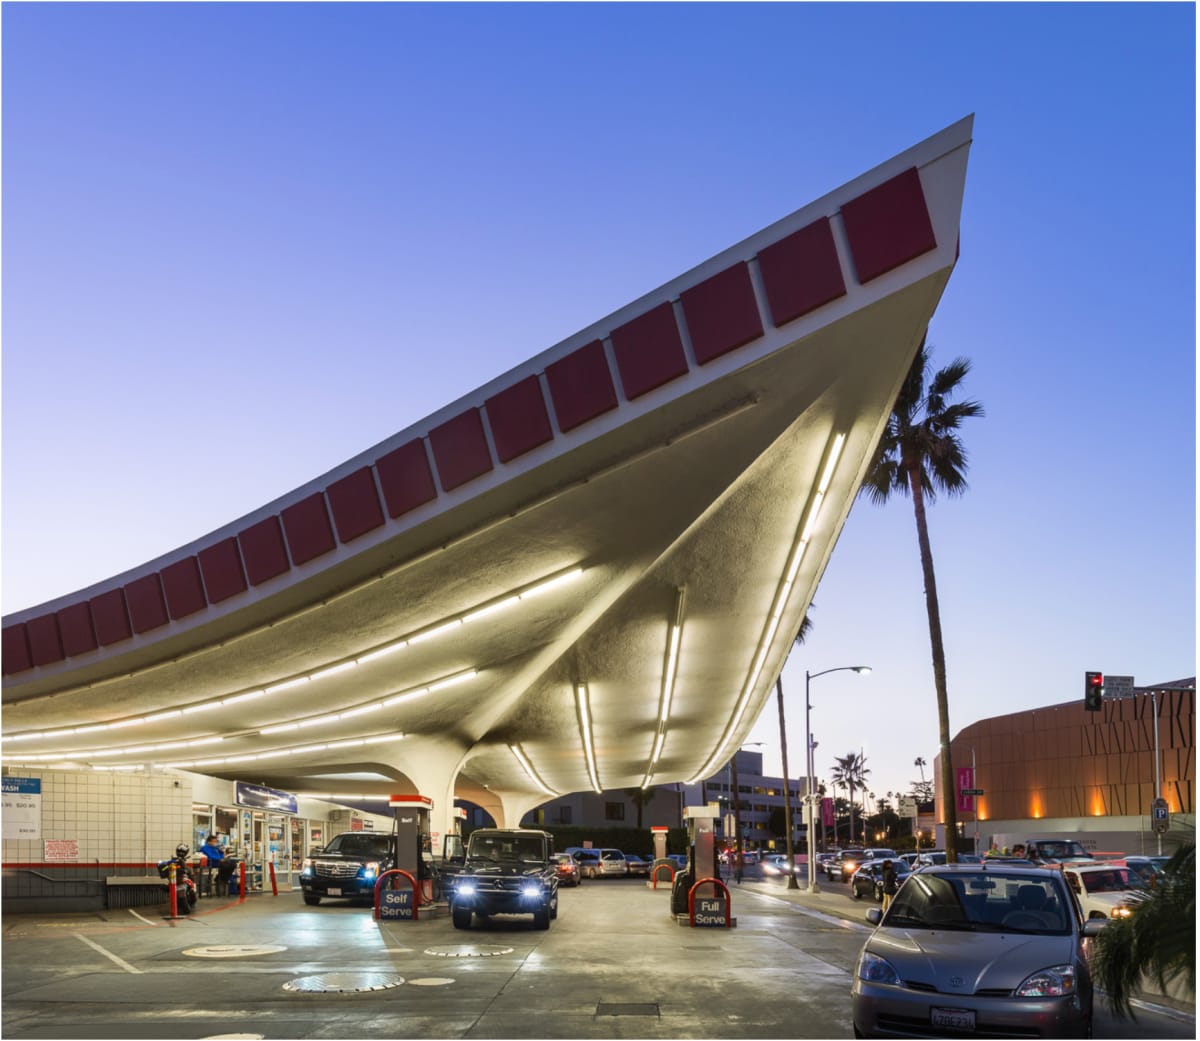 Union 76 Gas Station by Ashok Sinha  Image: Los Angeles, California 
Architects: William L. Pereira & Associates, Gin Wong 
Year of Completion: 1965